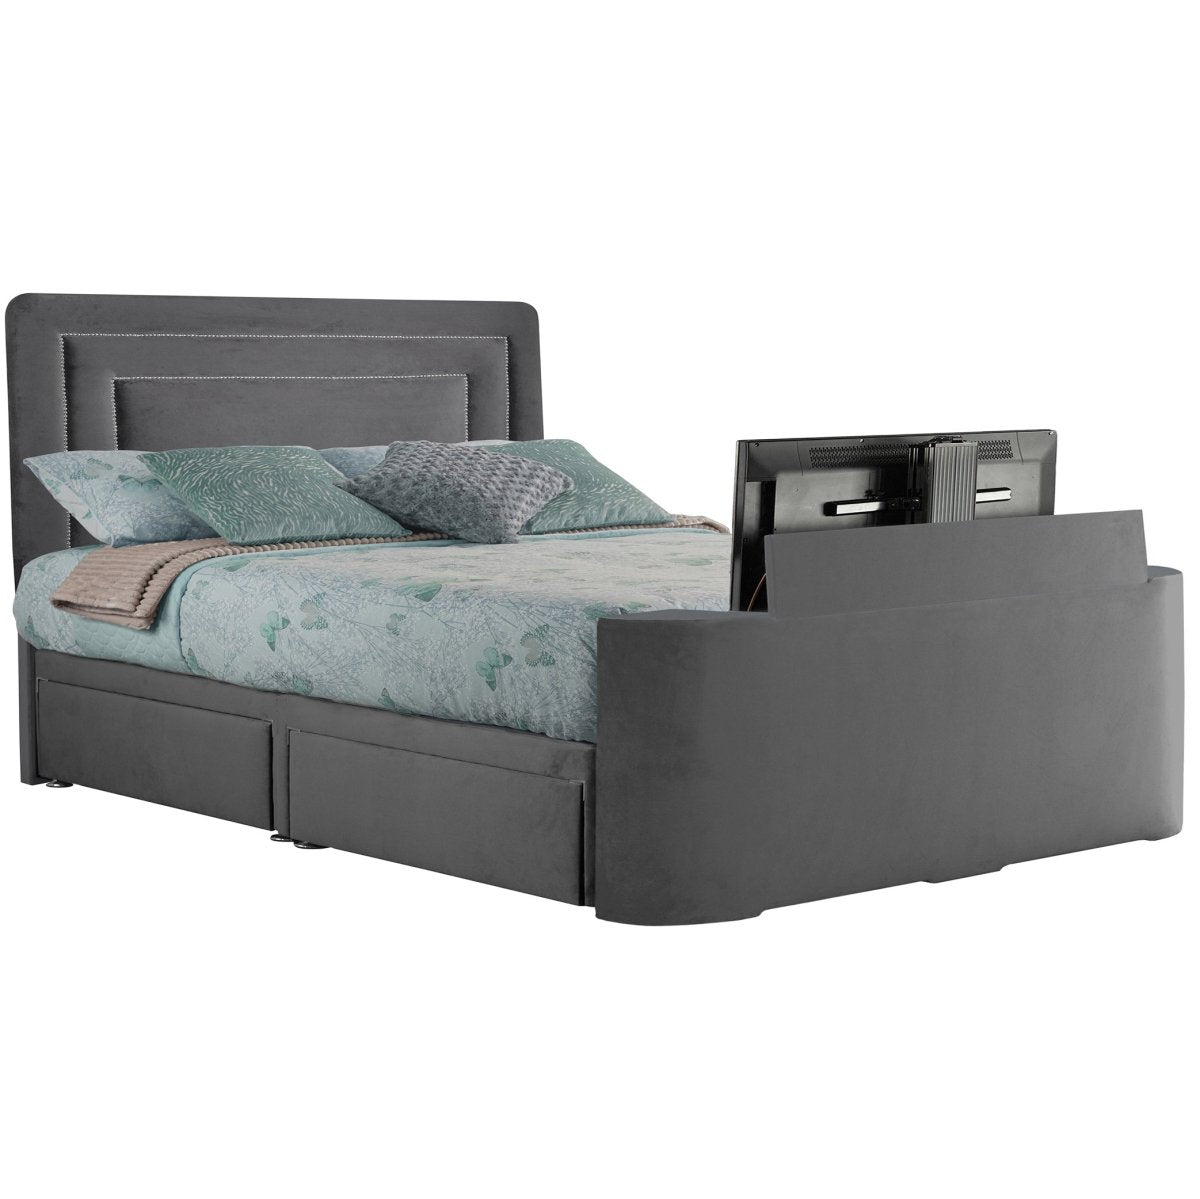 Image Brogan TV Bed By Sweet Dreams - TV Beds Northwest - choose your colour tvbed - doubletvbed